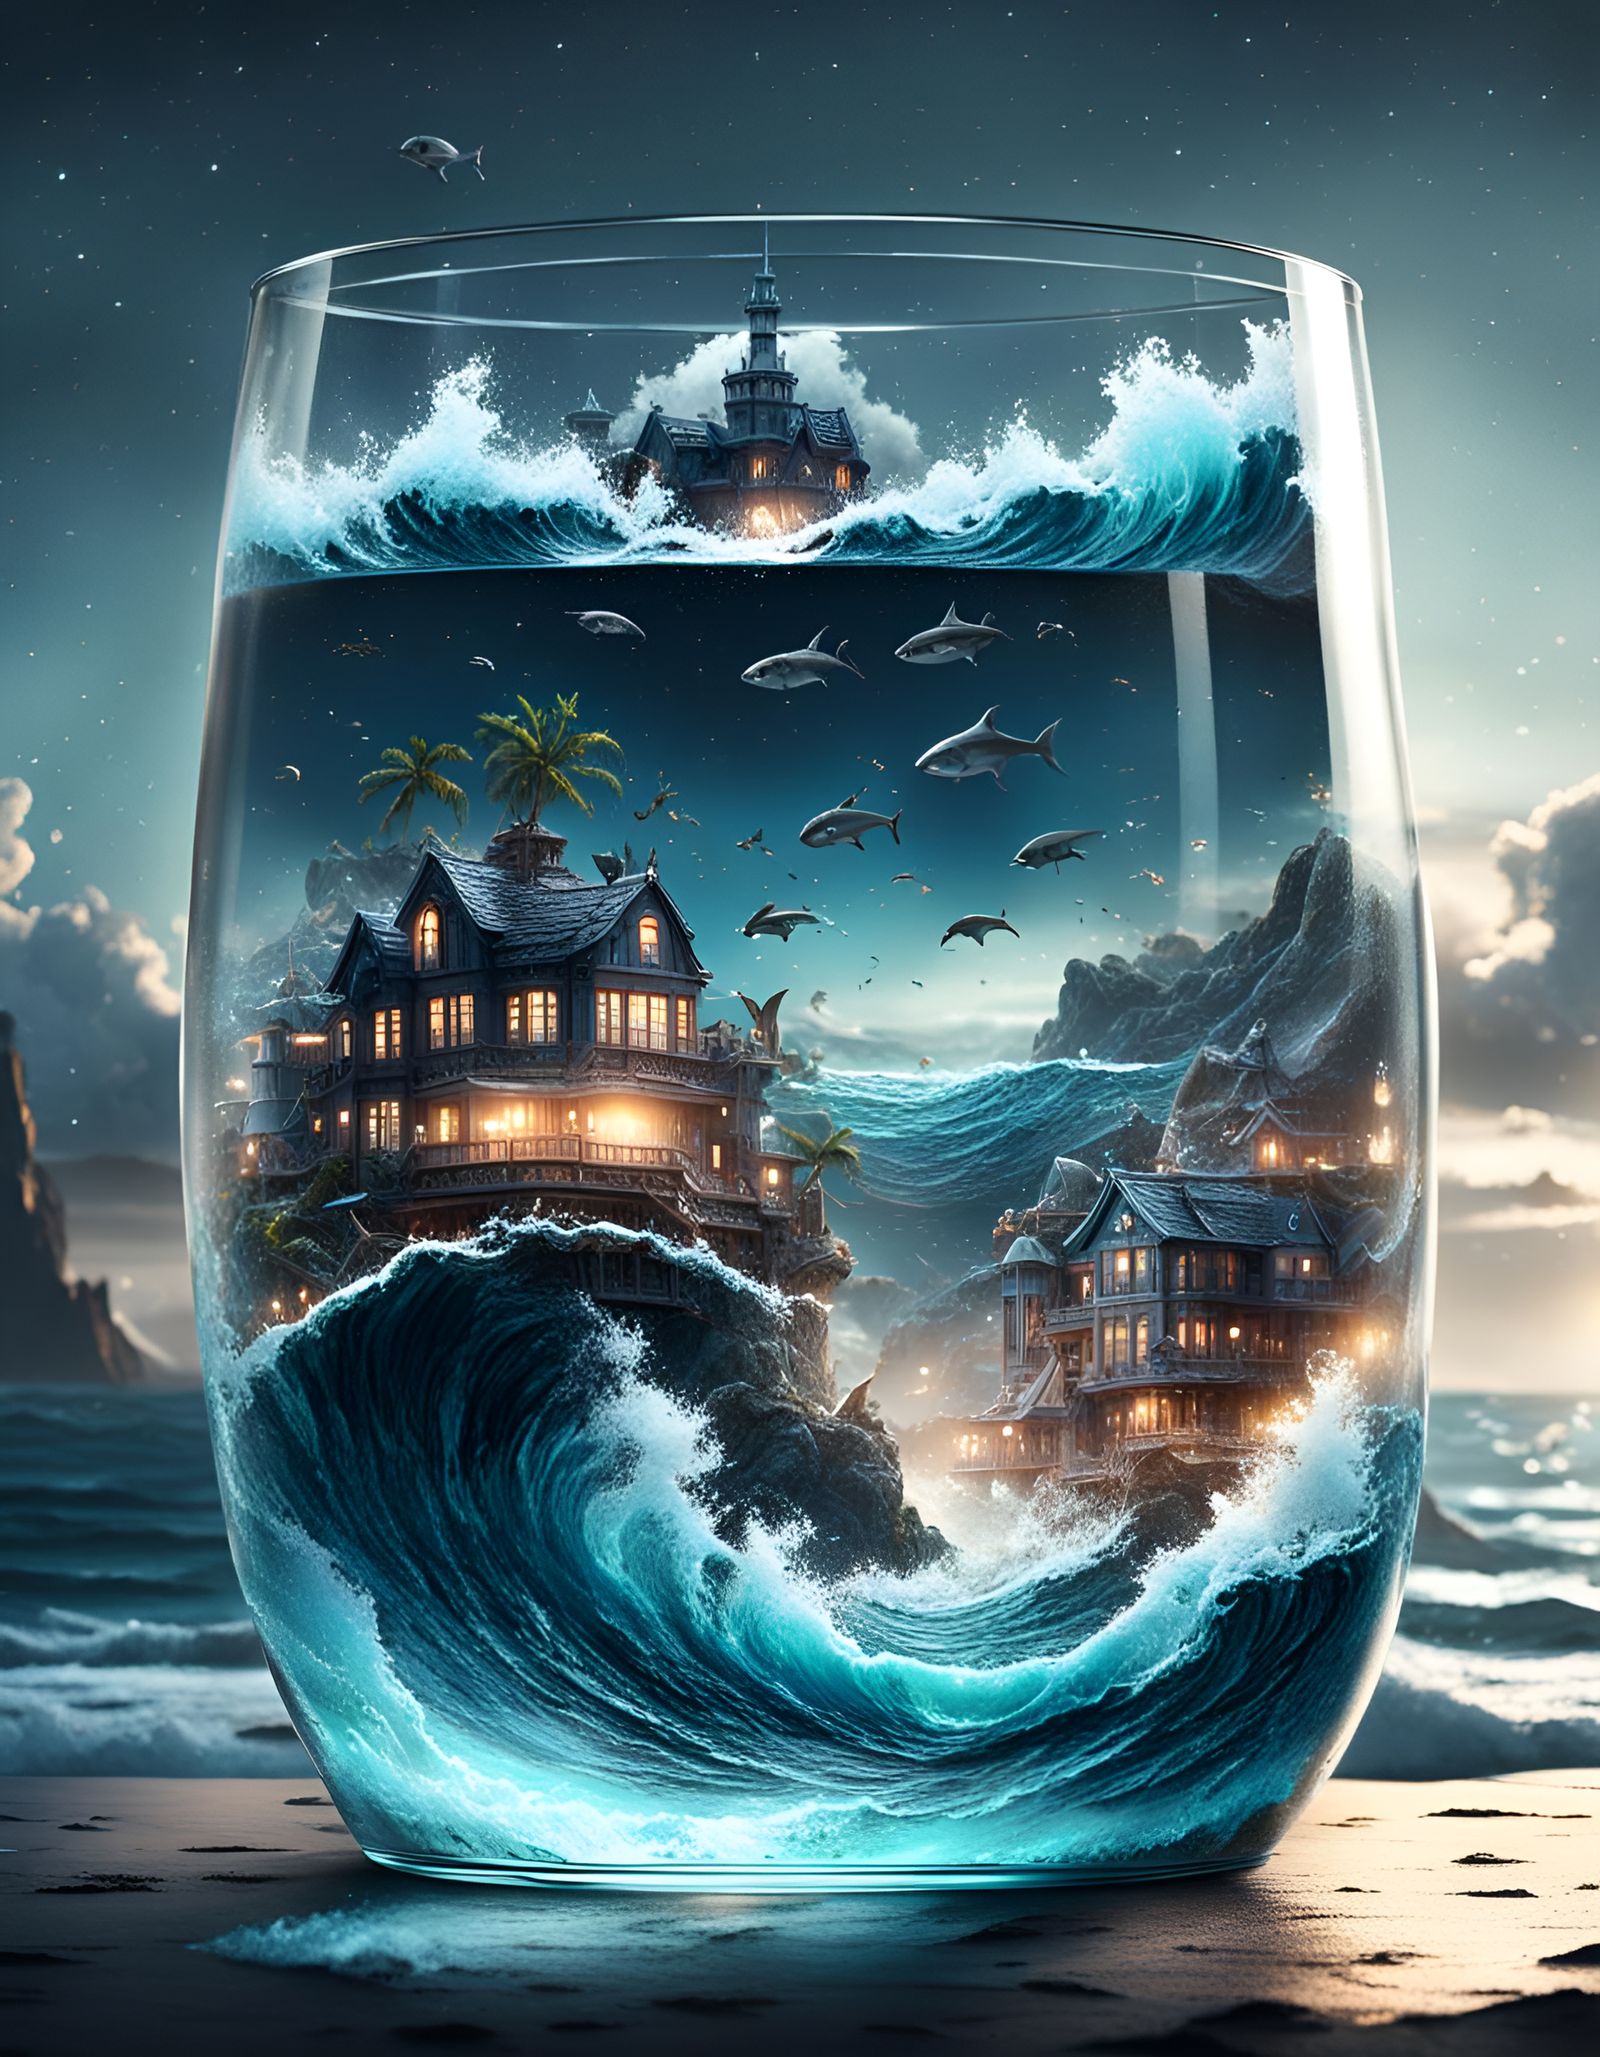 The ocean in a glass at midnight